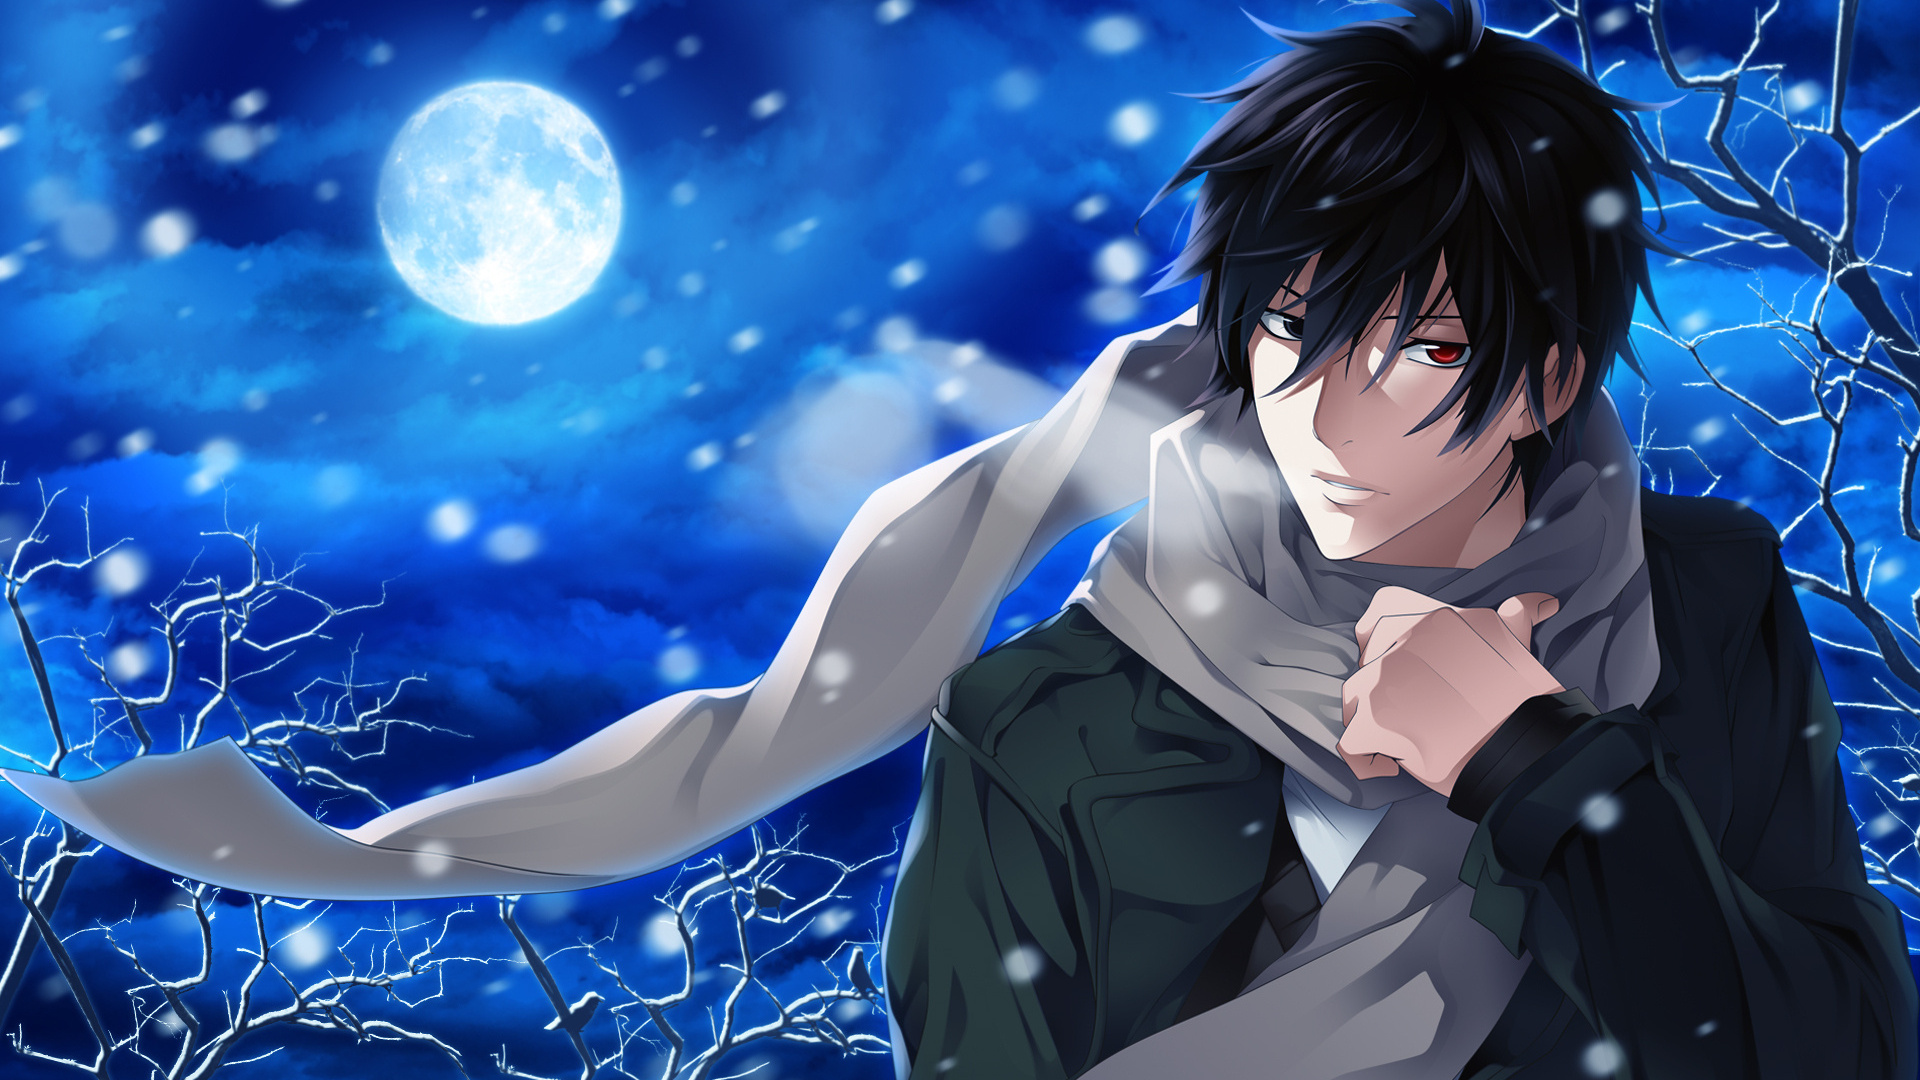 Anime image of a boy with a blue night sky with the moon in the background.